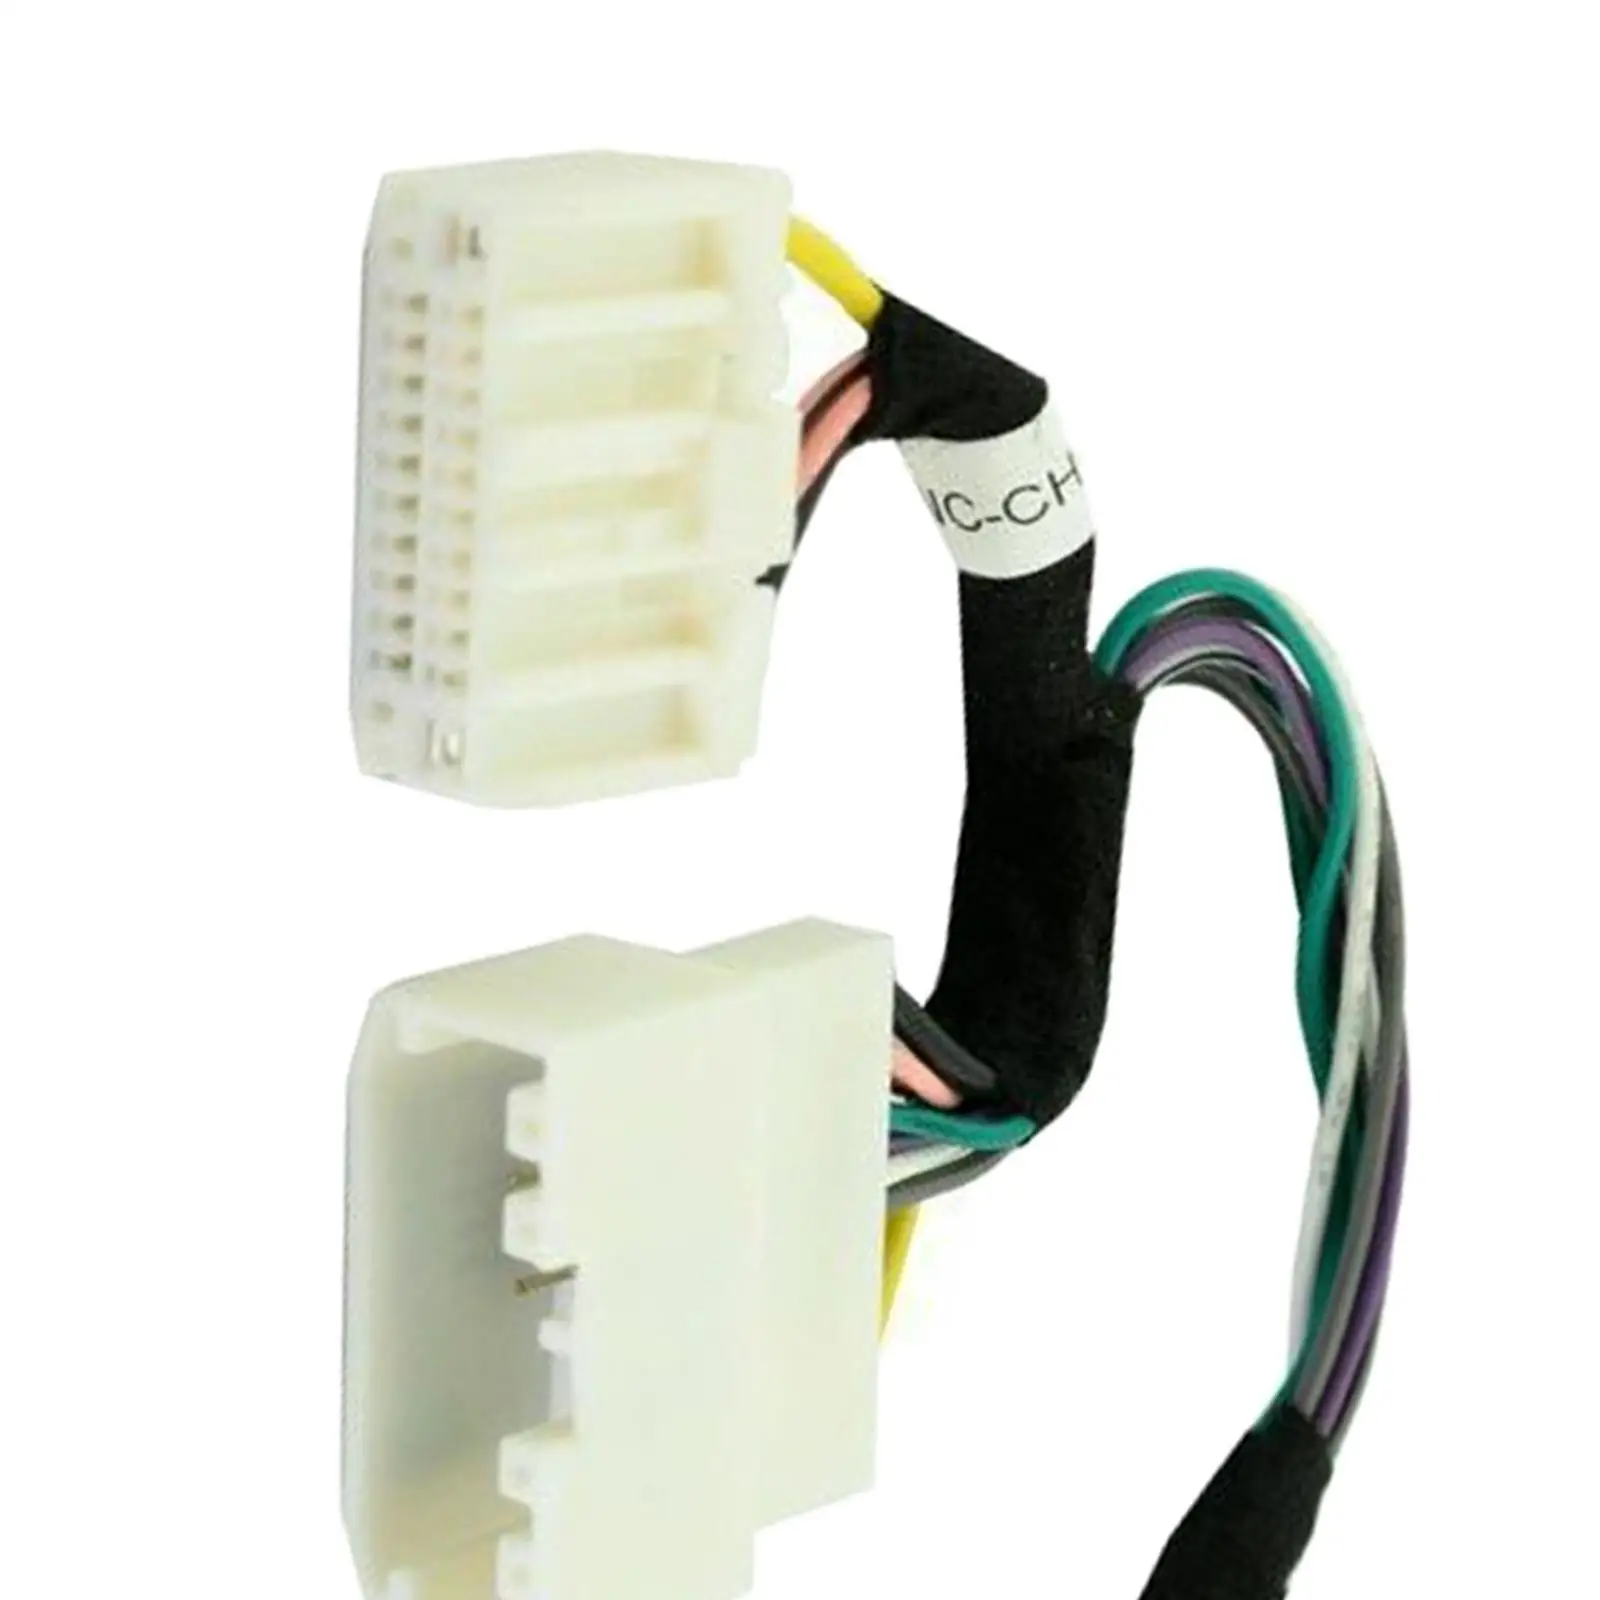 Anc-Ch01 Direct Replaces Easy Installation for Chrysler, Jeep, RAM